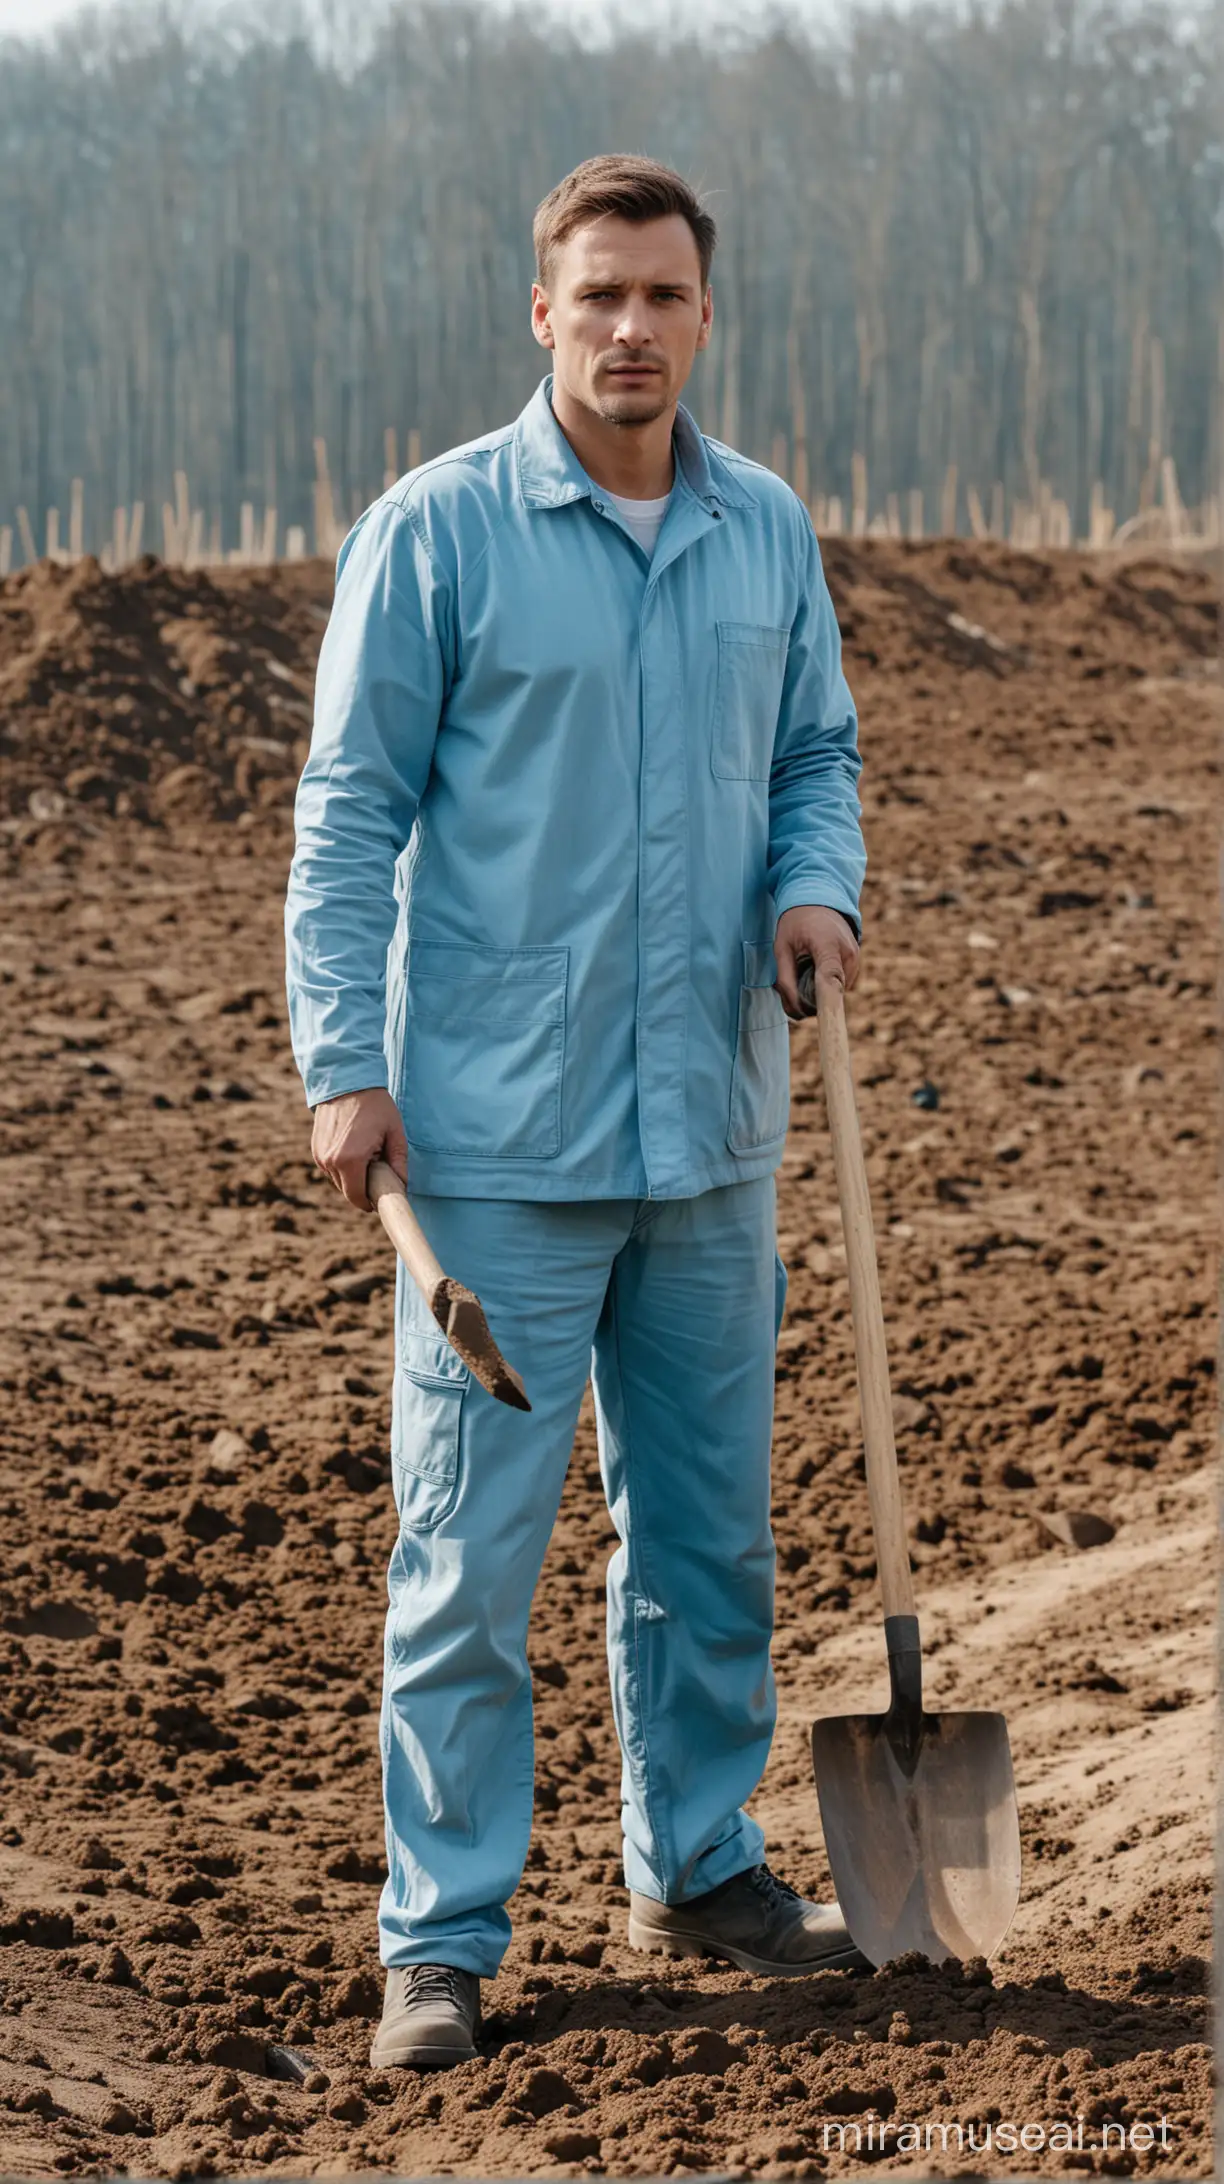 European man - foreman stands in light blue clothes, behind him workers are digging the ground with shovels